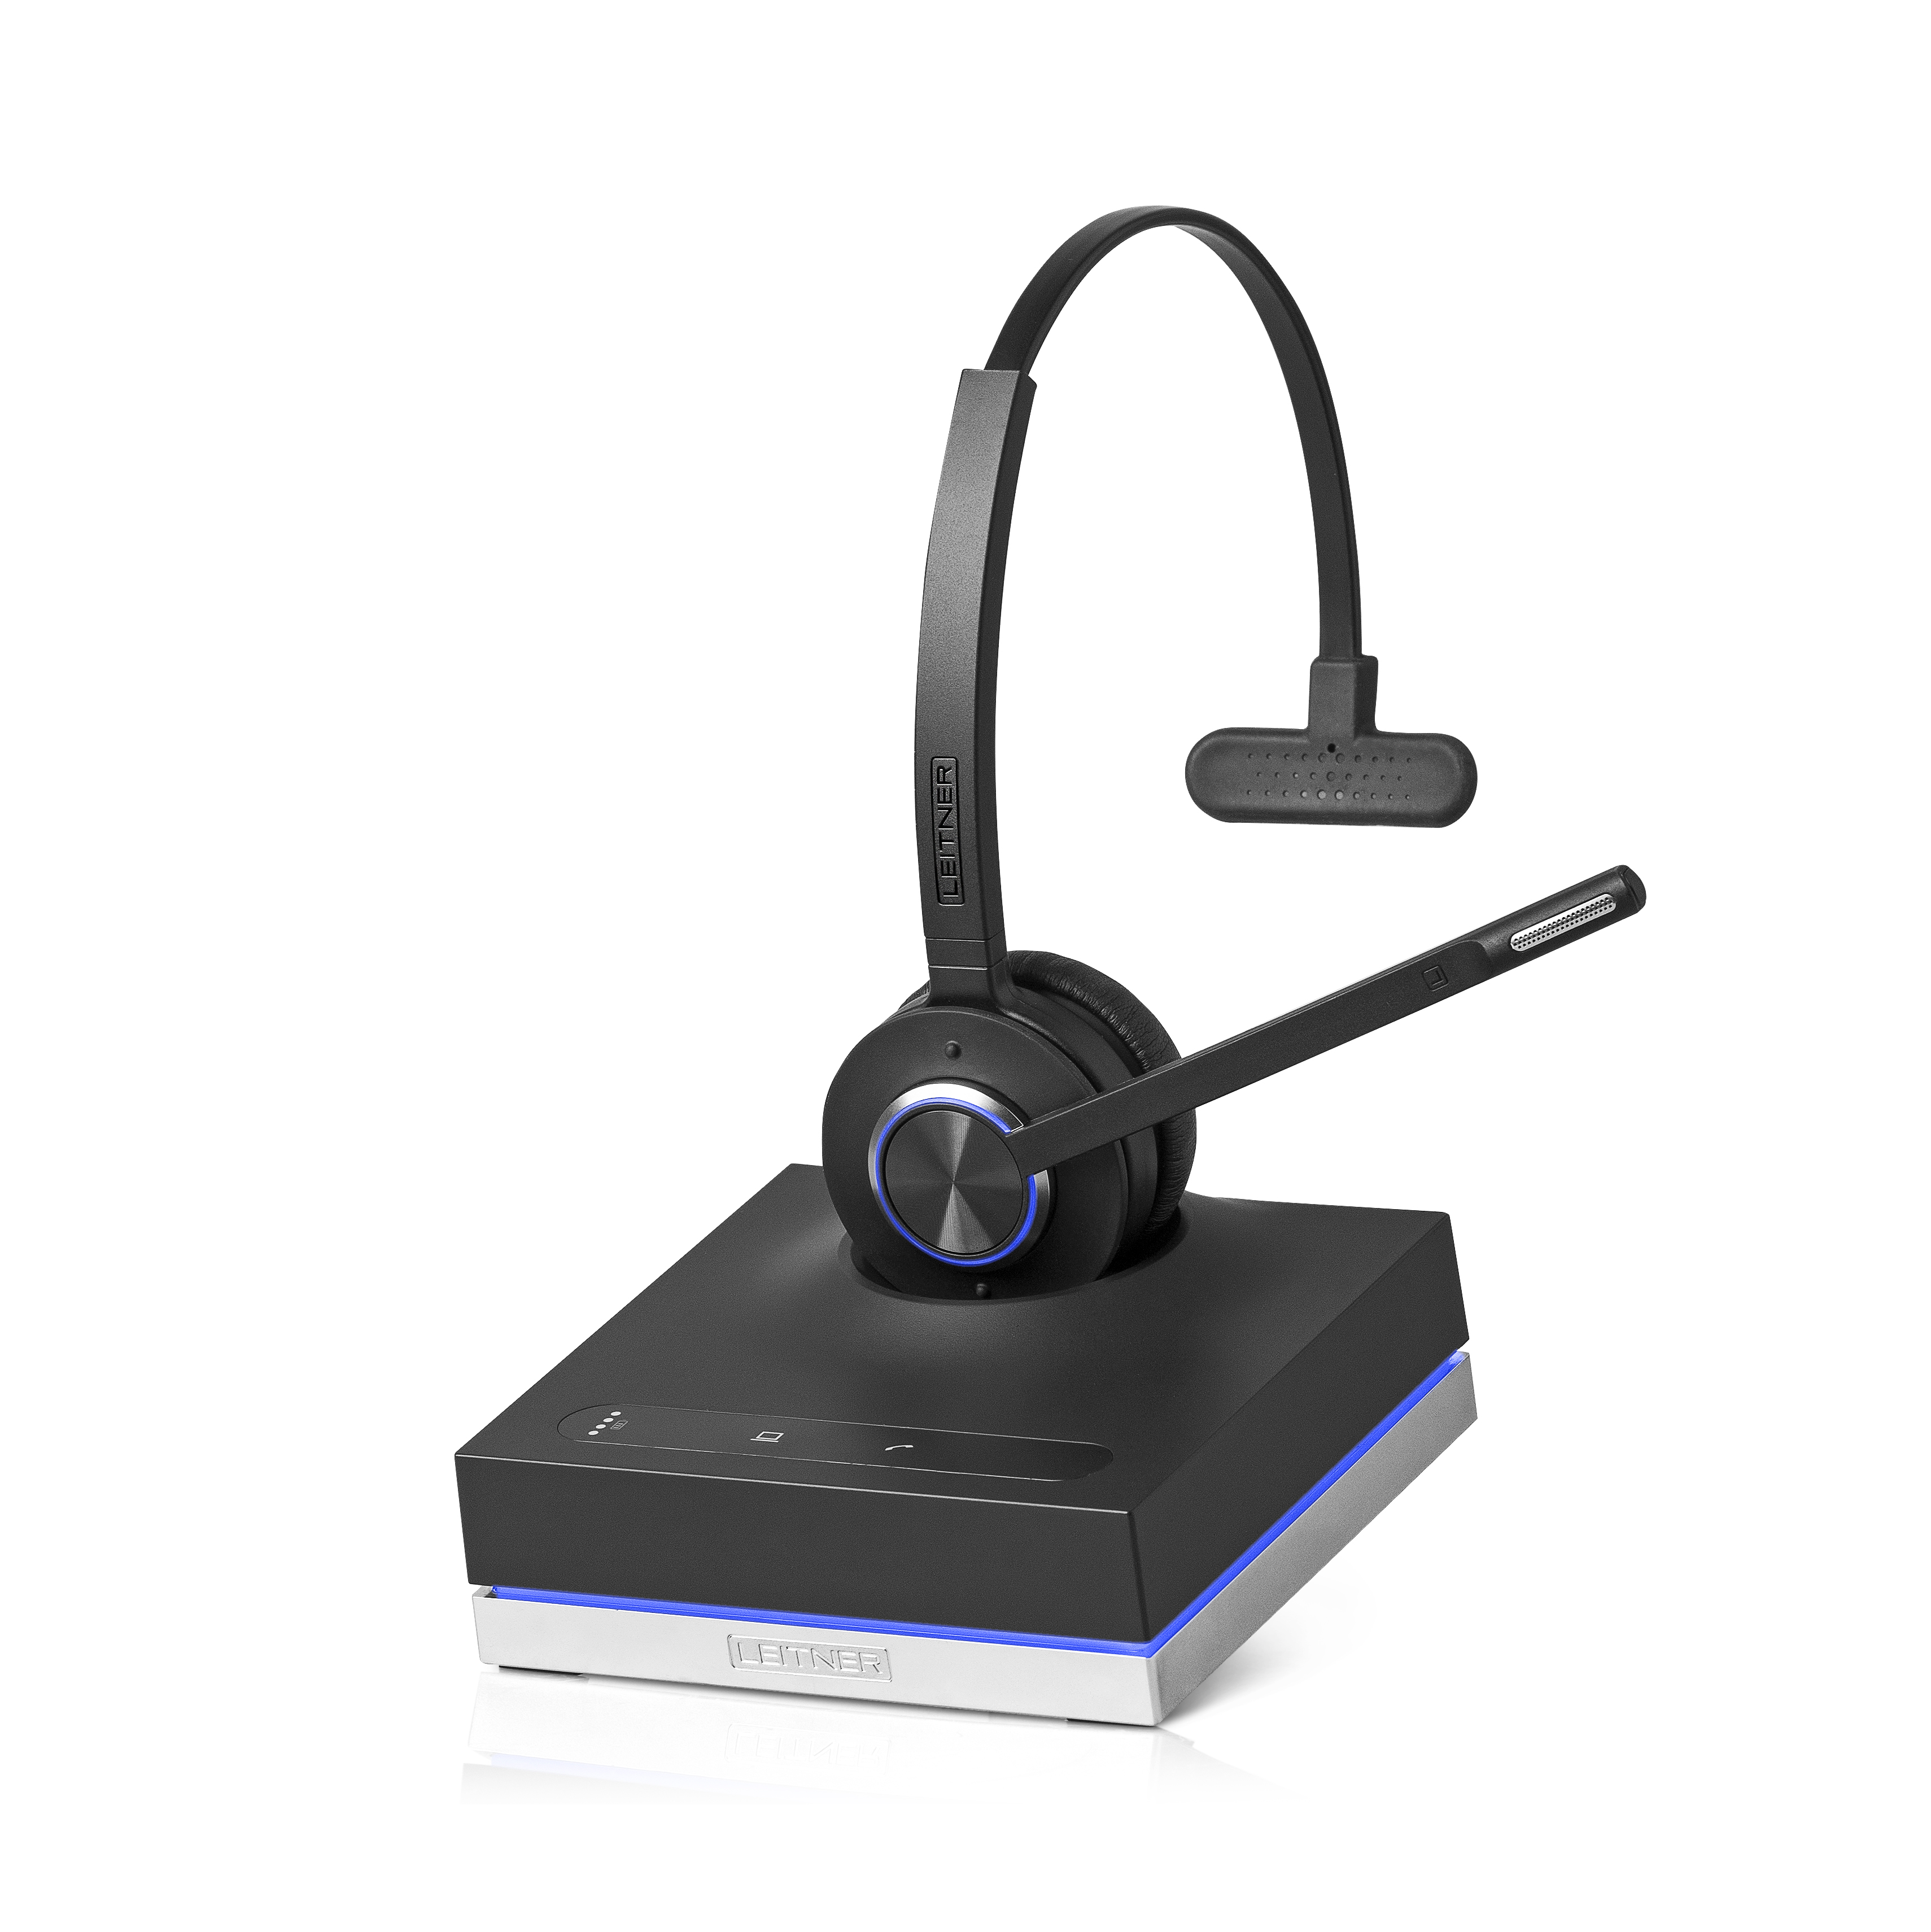 Leitner LH570 wireless headset and base with lights